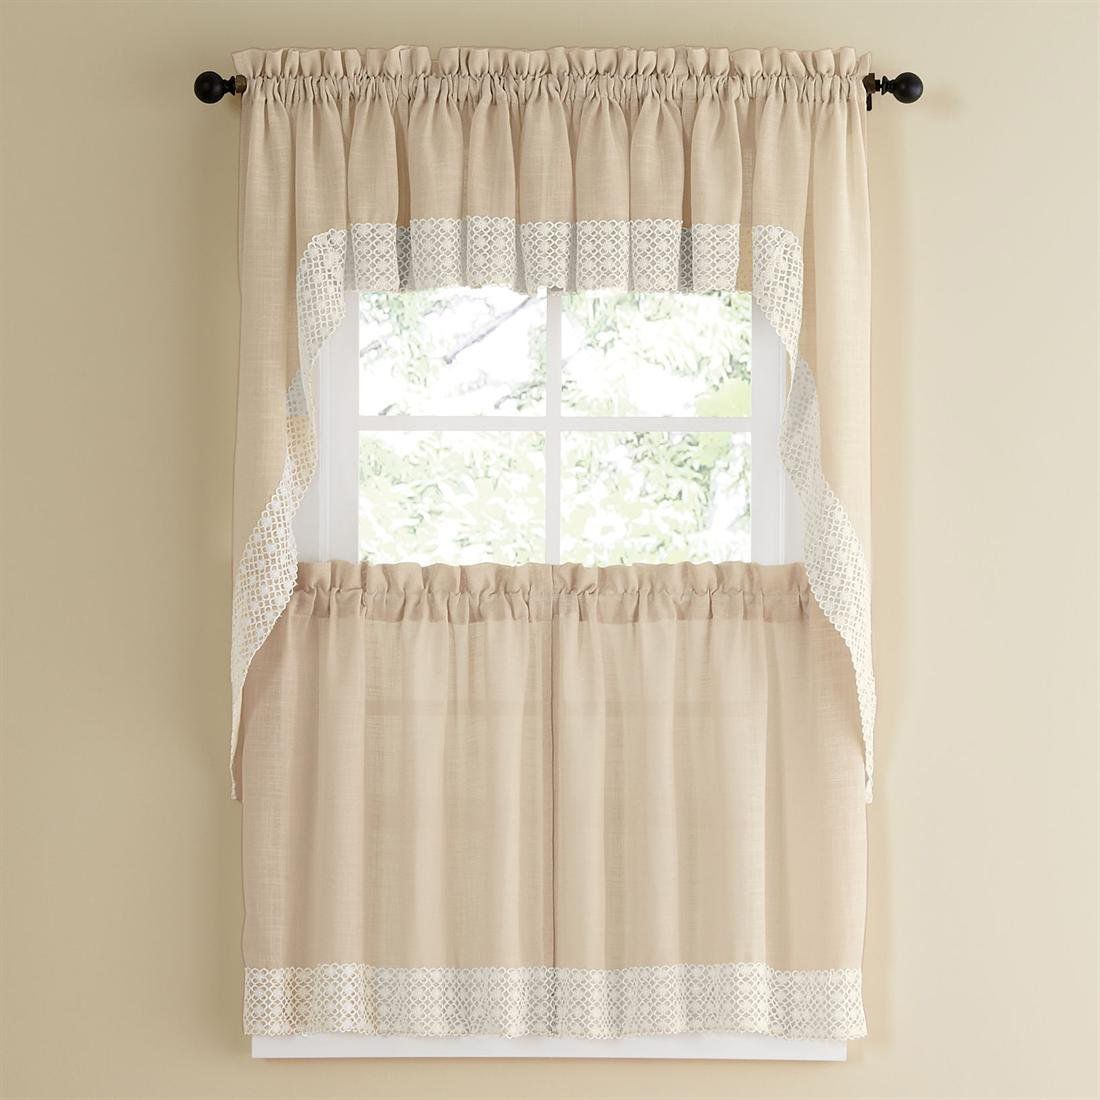 Details About Salem Kitchen Curtain – French Vanilla W/lace Trim – Lorraine  Home Fashions Throughout Tranquility Curtain Tier Pairs (Photo 11 of 20)